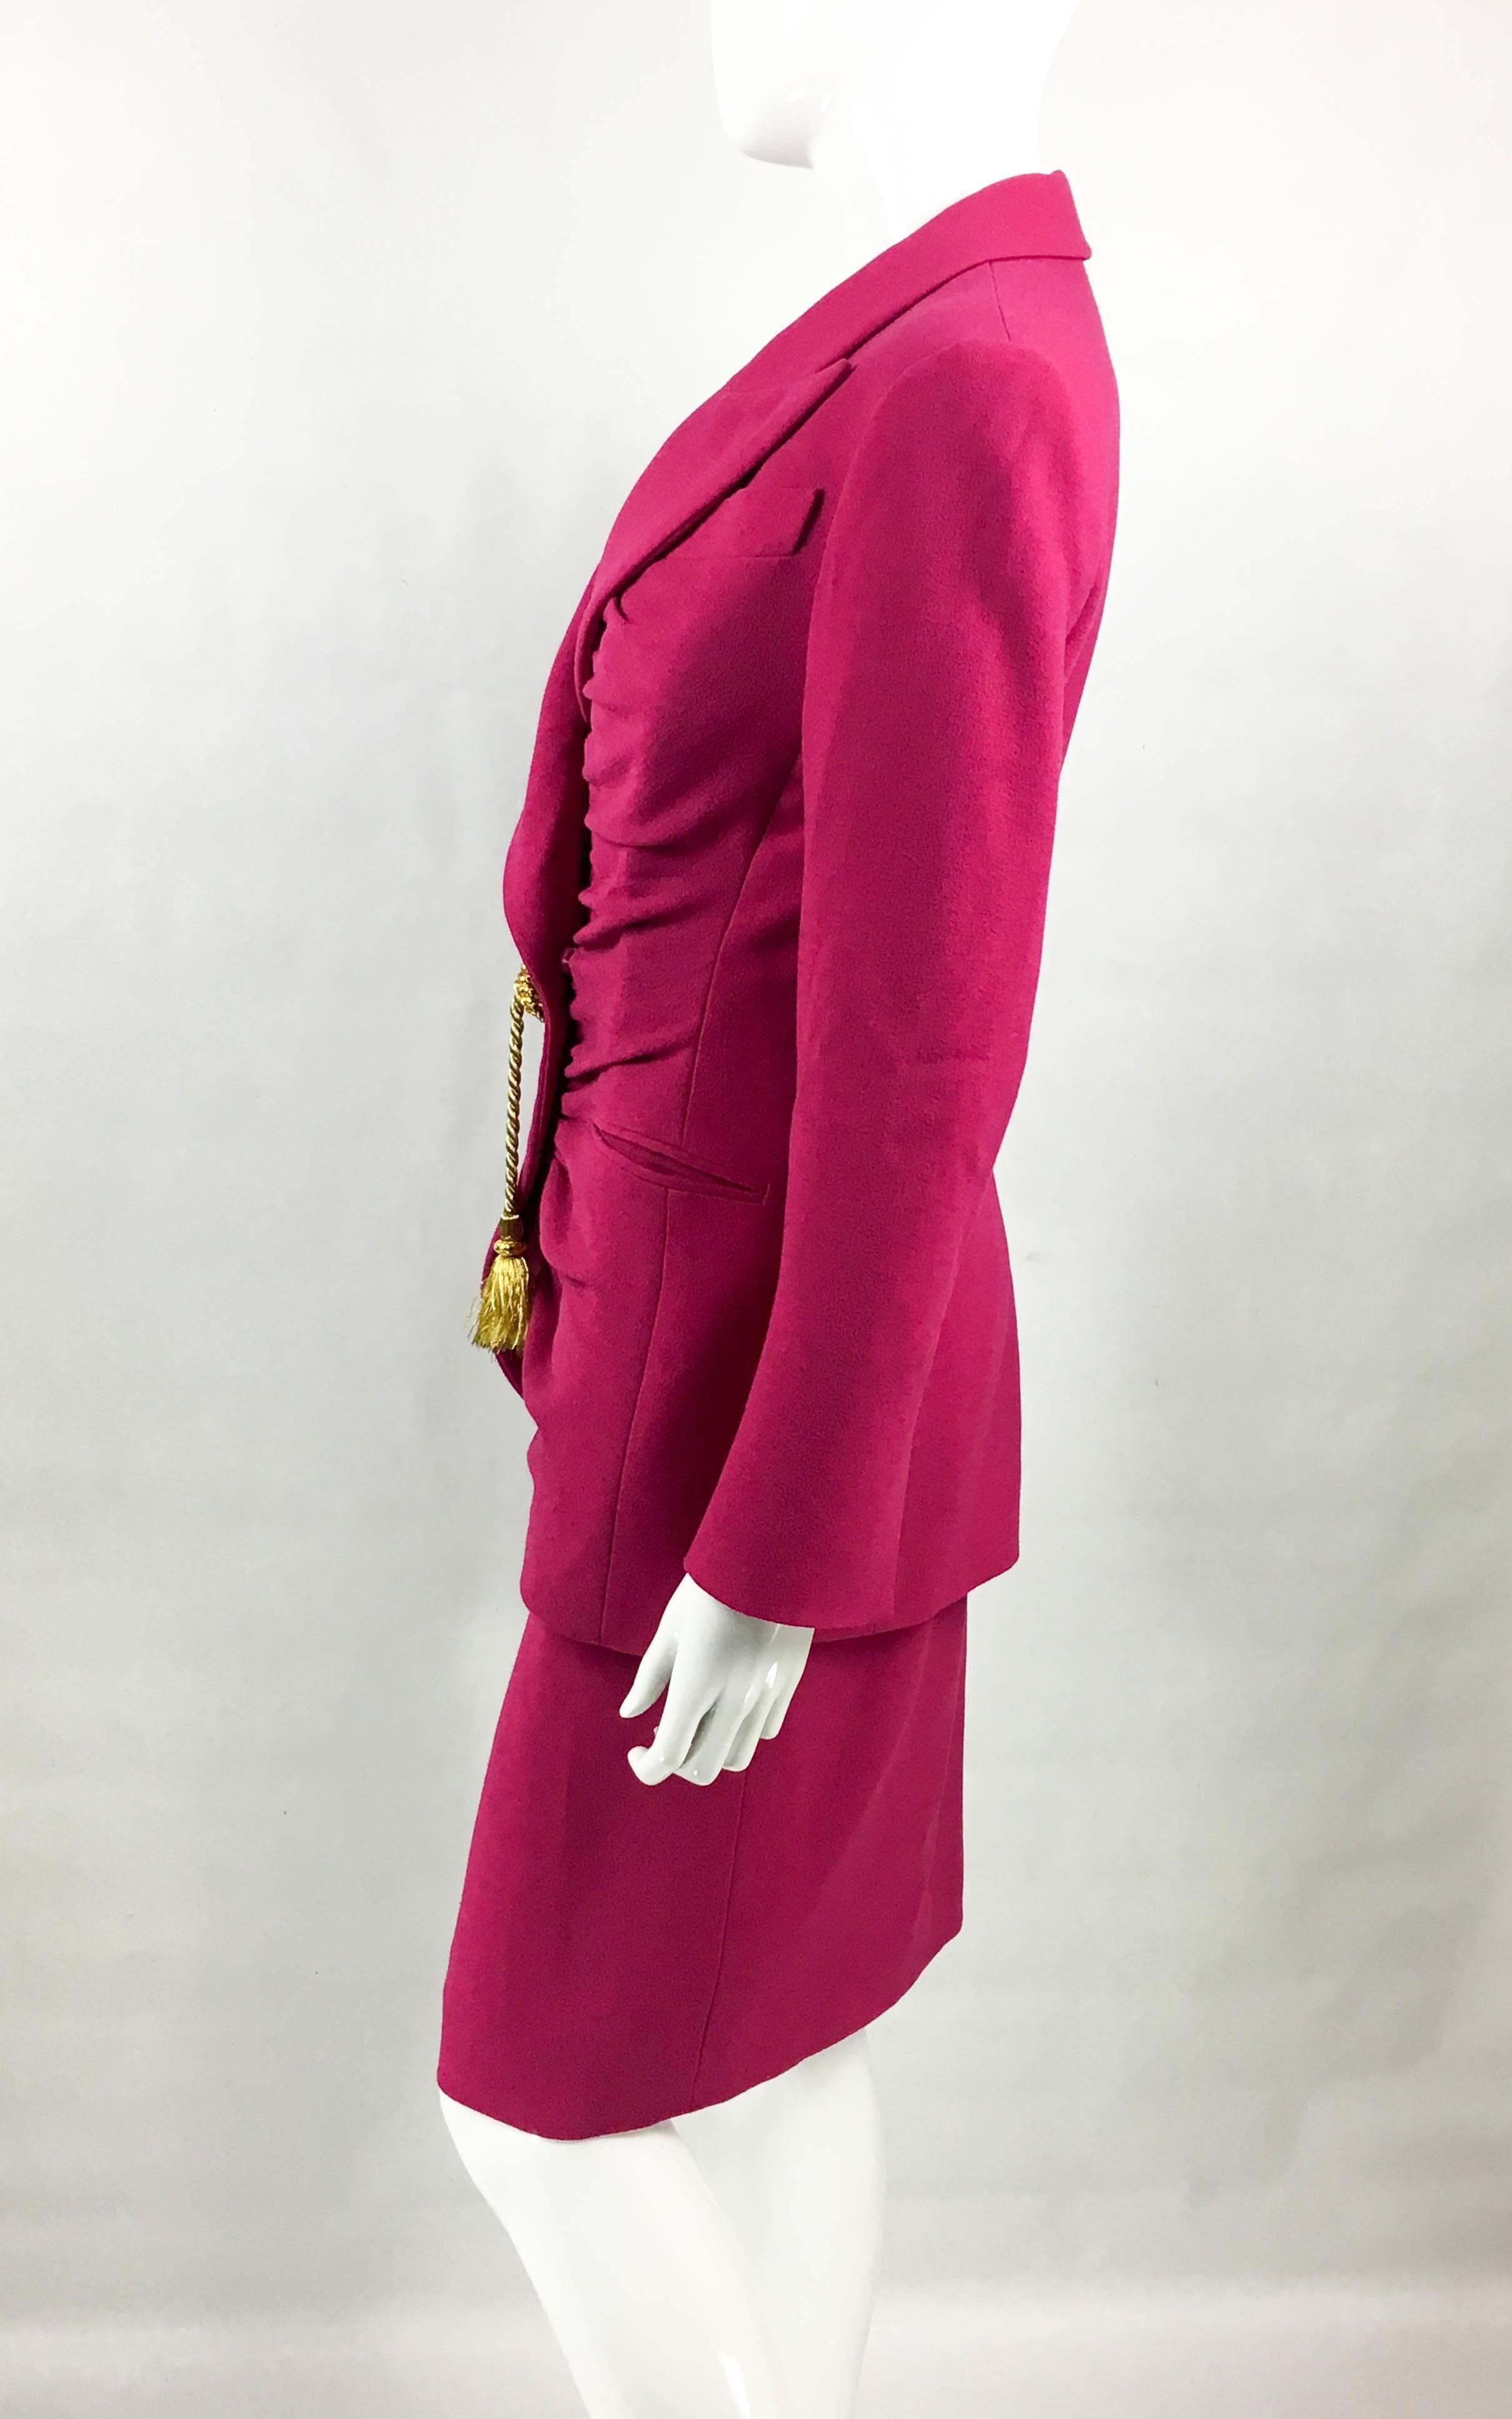 1980s Dior Numbered Demi-Couture Hot Pink Suit With Golden Tassel  In Excellent Condition For Sale In London, Chelsea